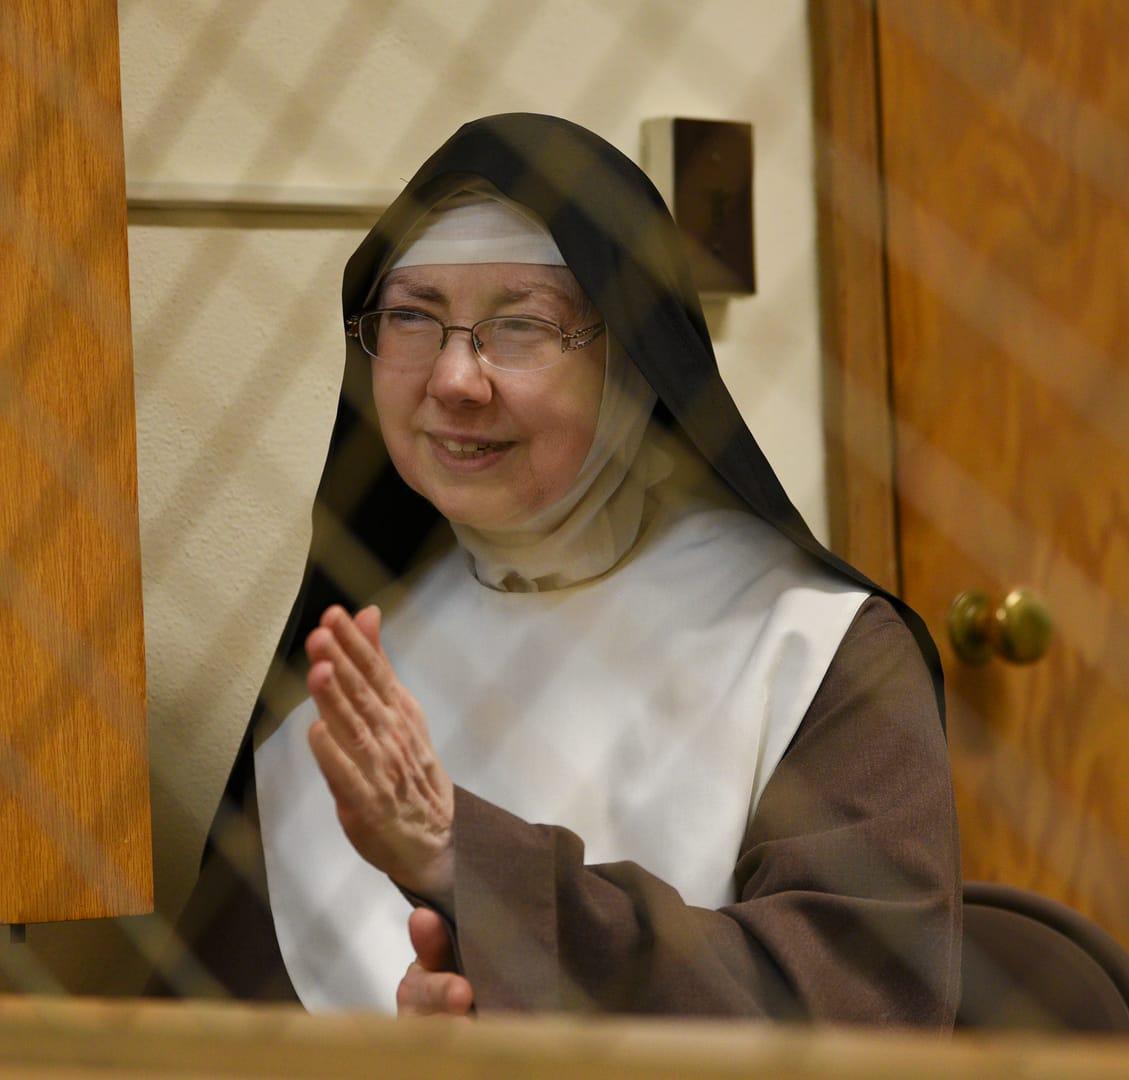 Cloistered nuns share advice on coping with virus sheltering